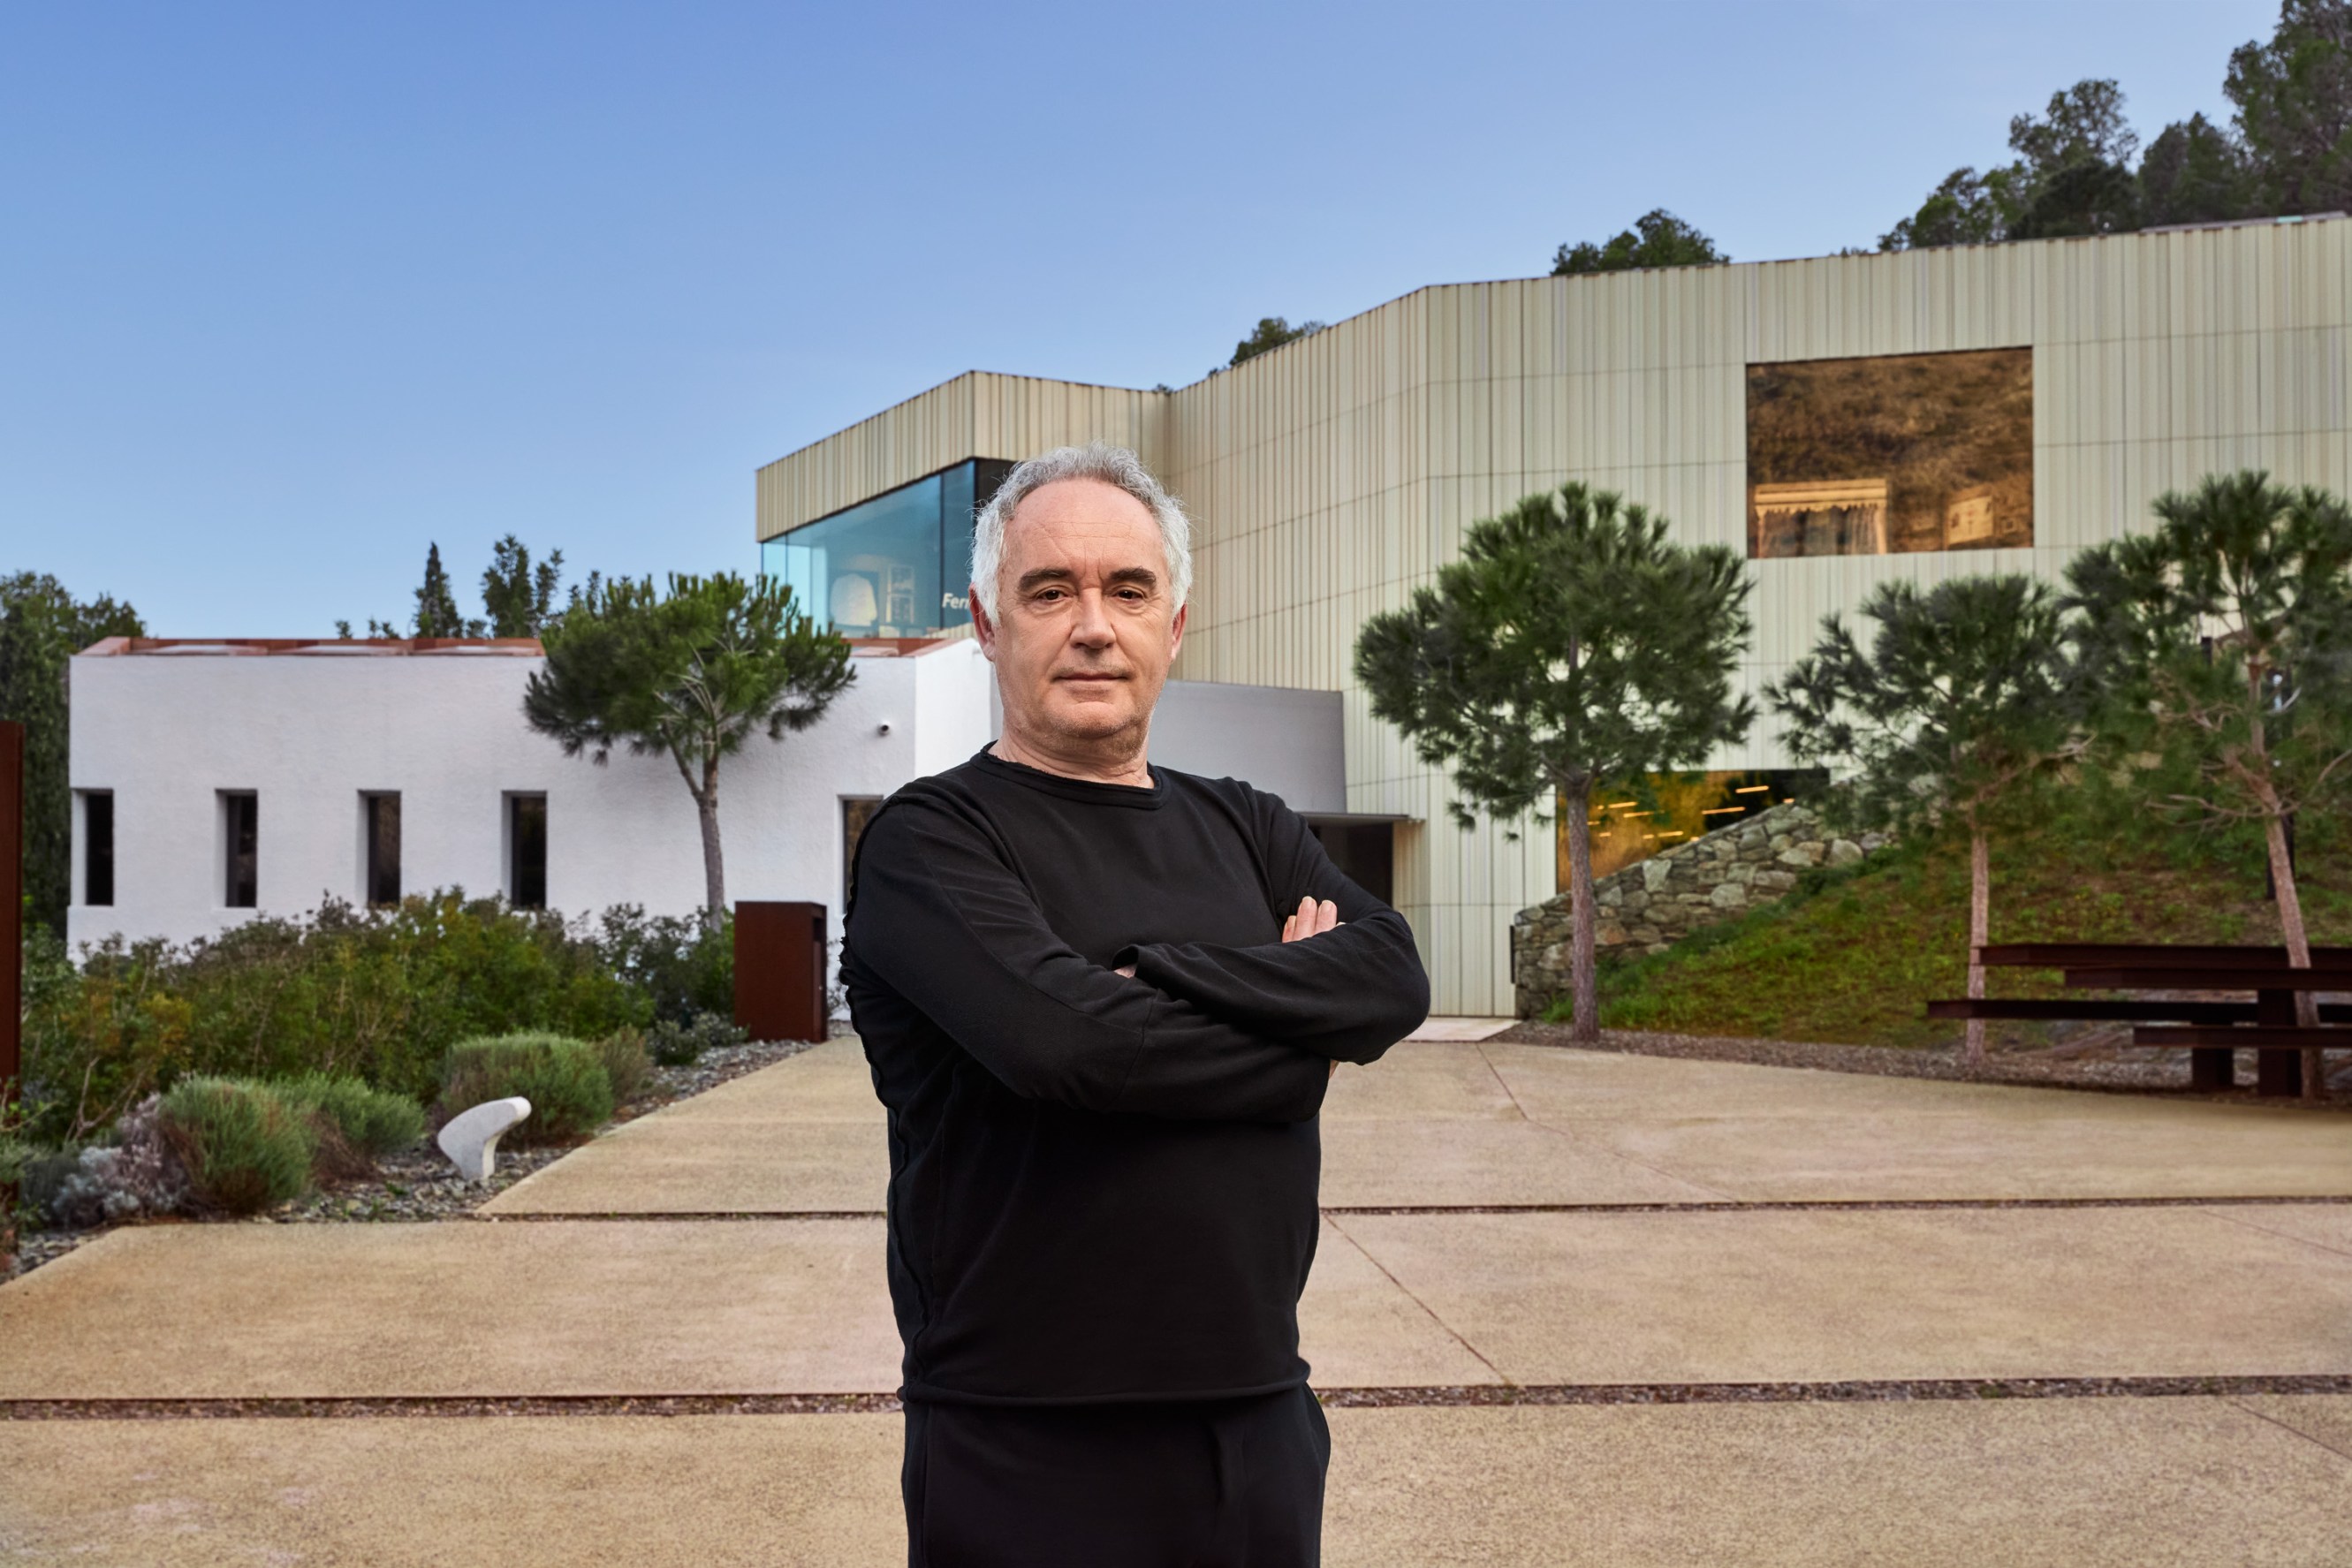 Chef Ferran Adrià standing in front of the elBulli1846 building, a modern, two story structure.